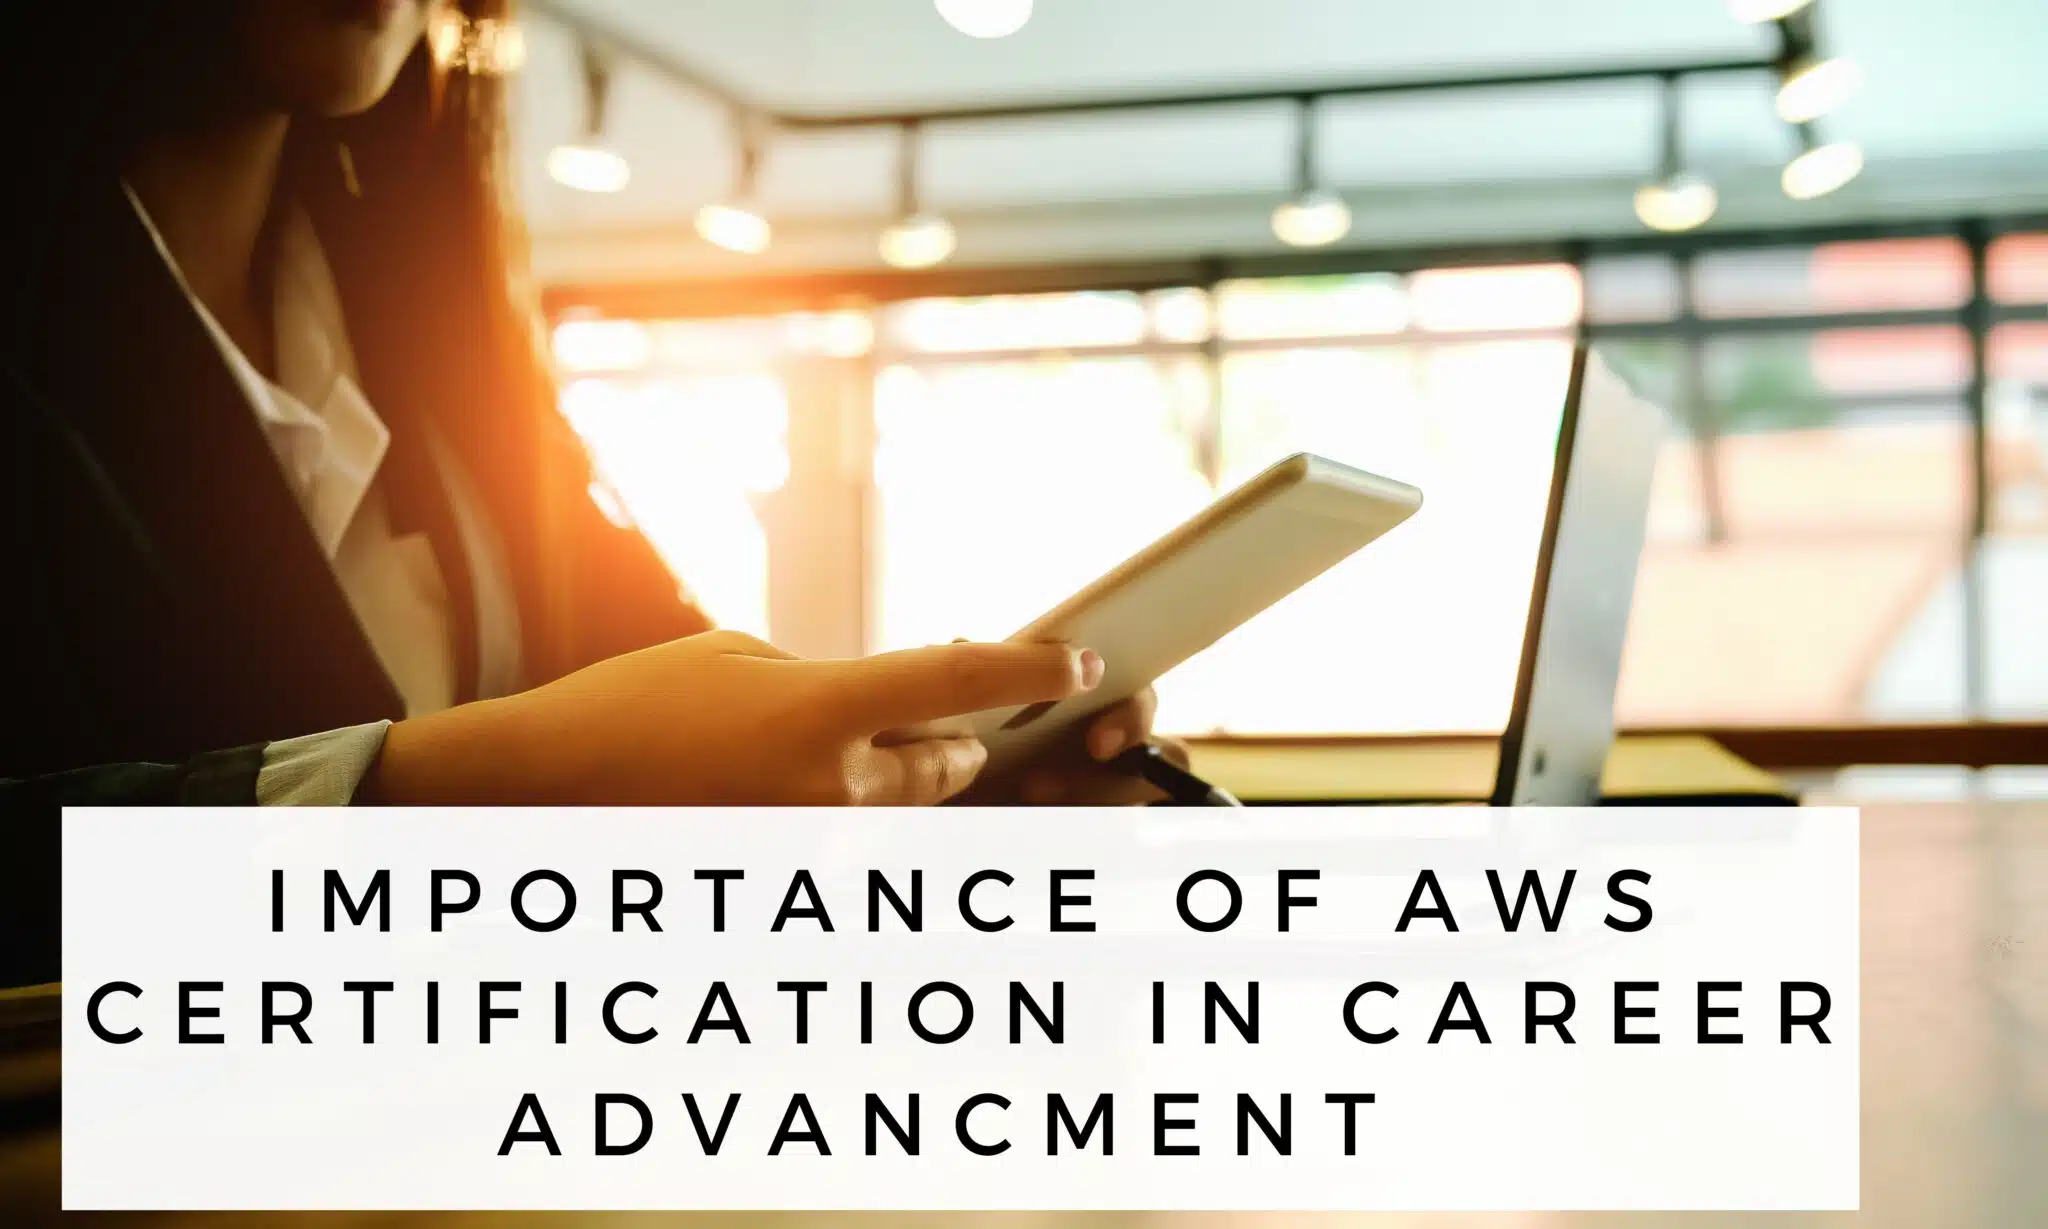 Importance of AWS Certification